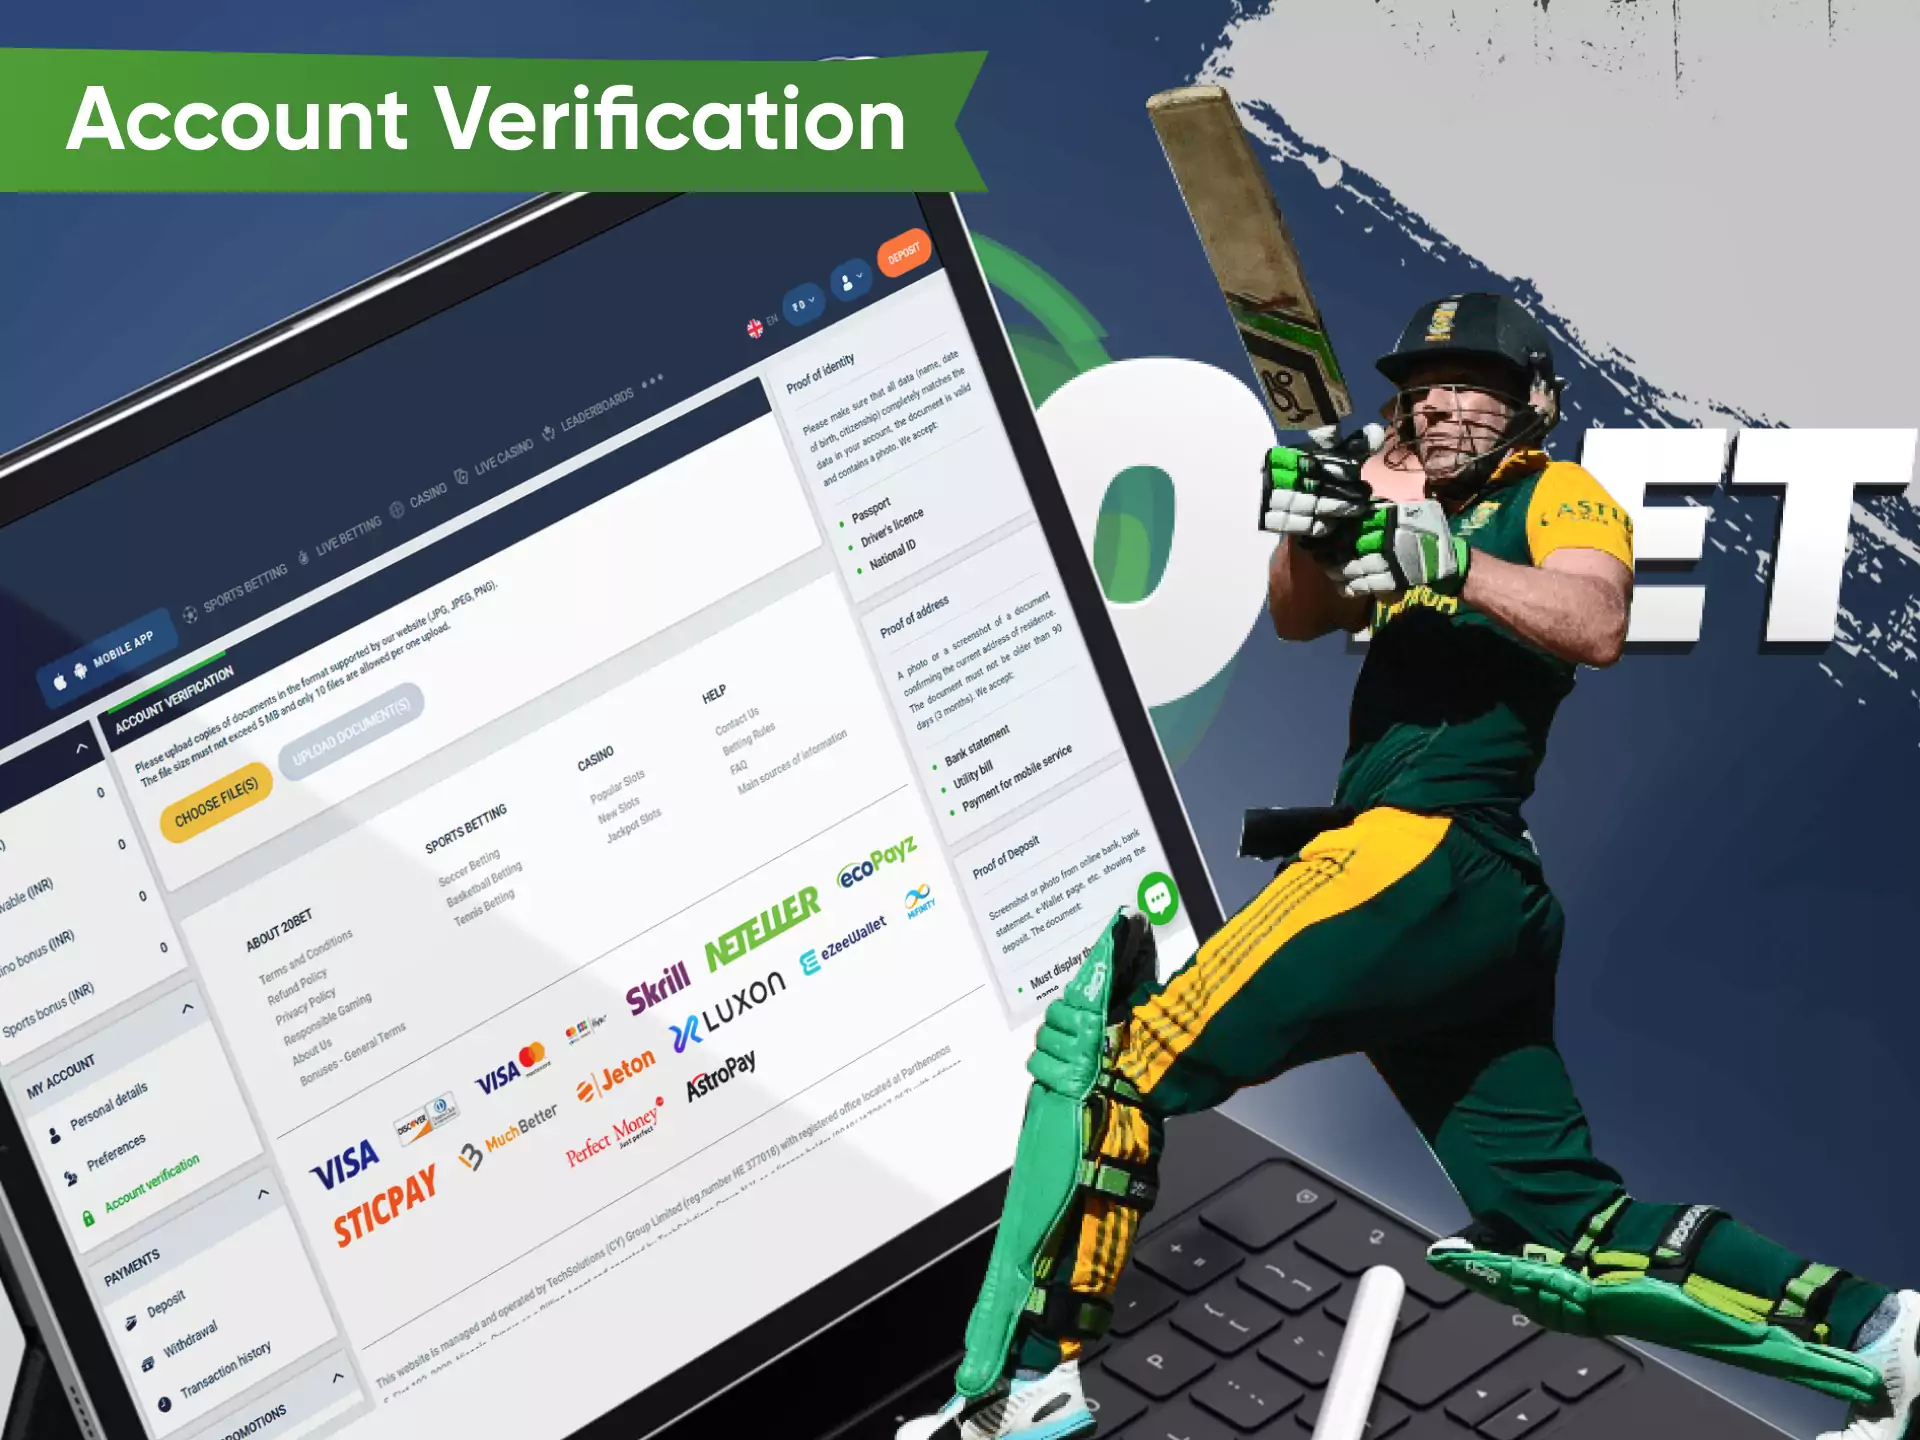 Only verified users of 20bet are allowed to bet on 20bet.